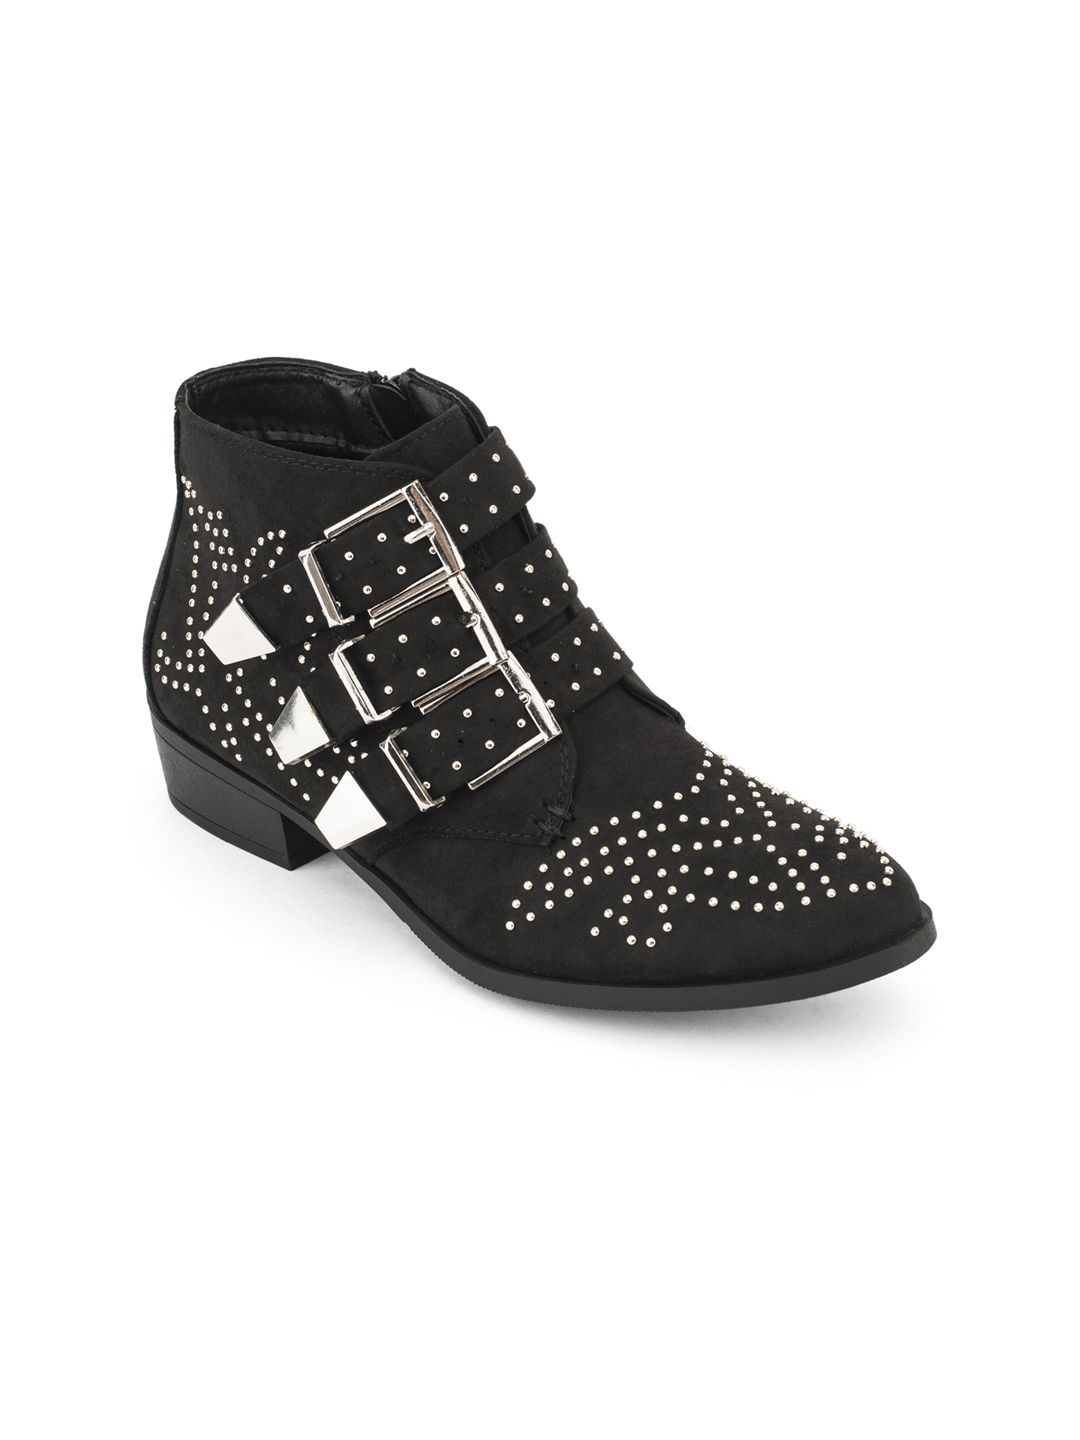 Truffle Collection Women Black Embellished Synthetic Mid-Top Flat Boots Price in India